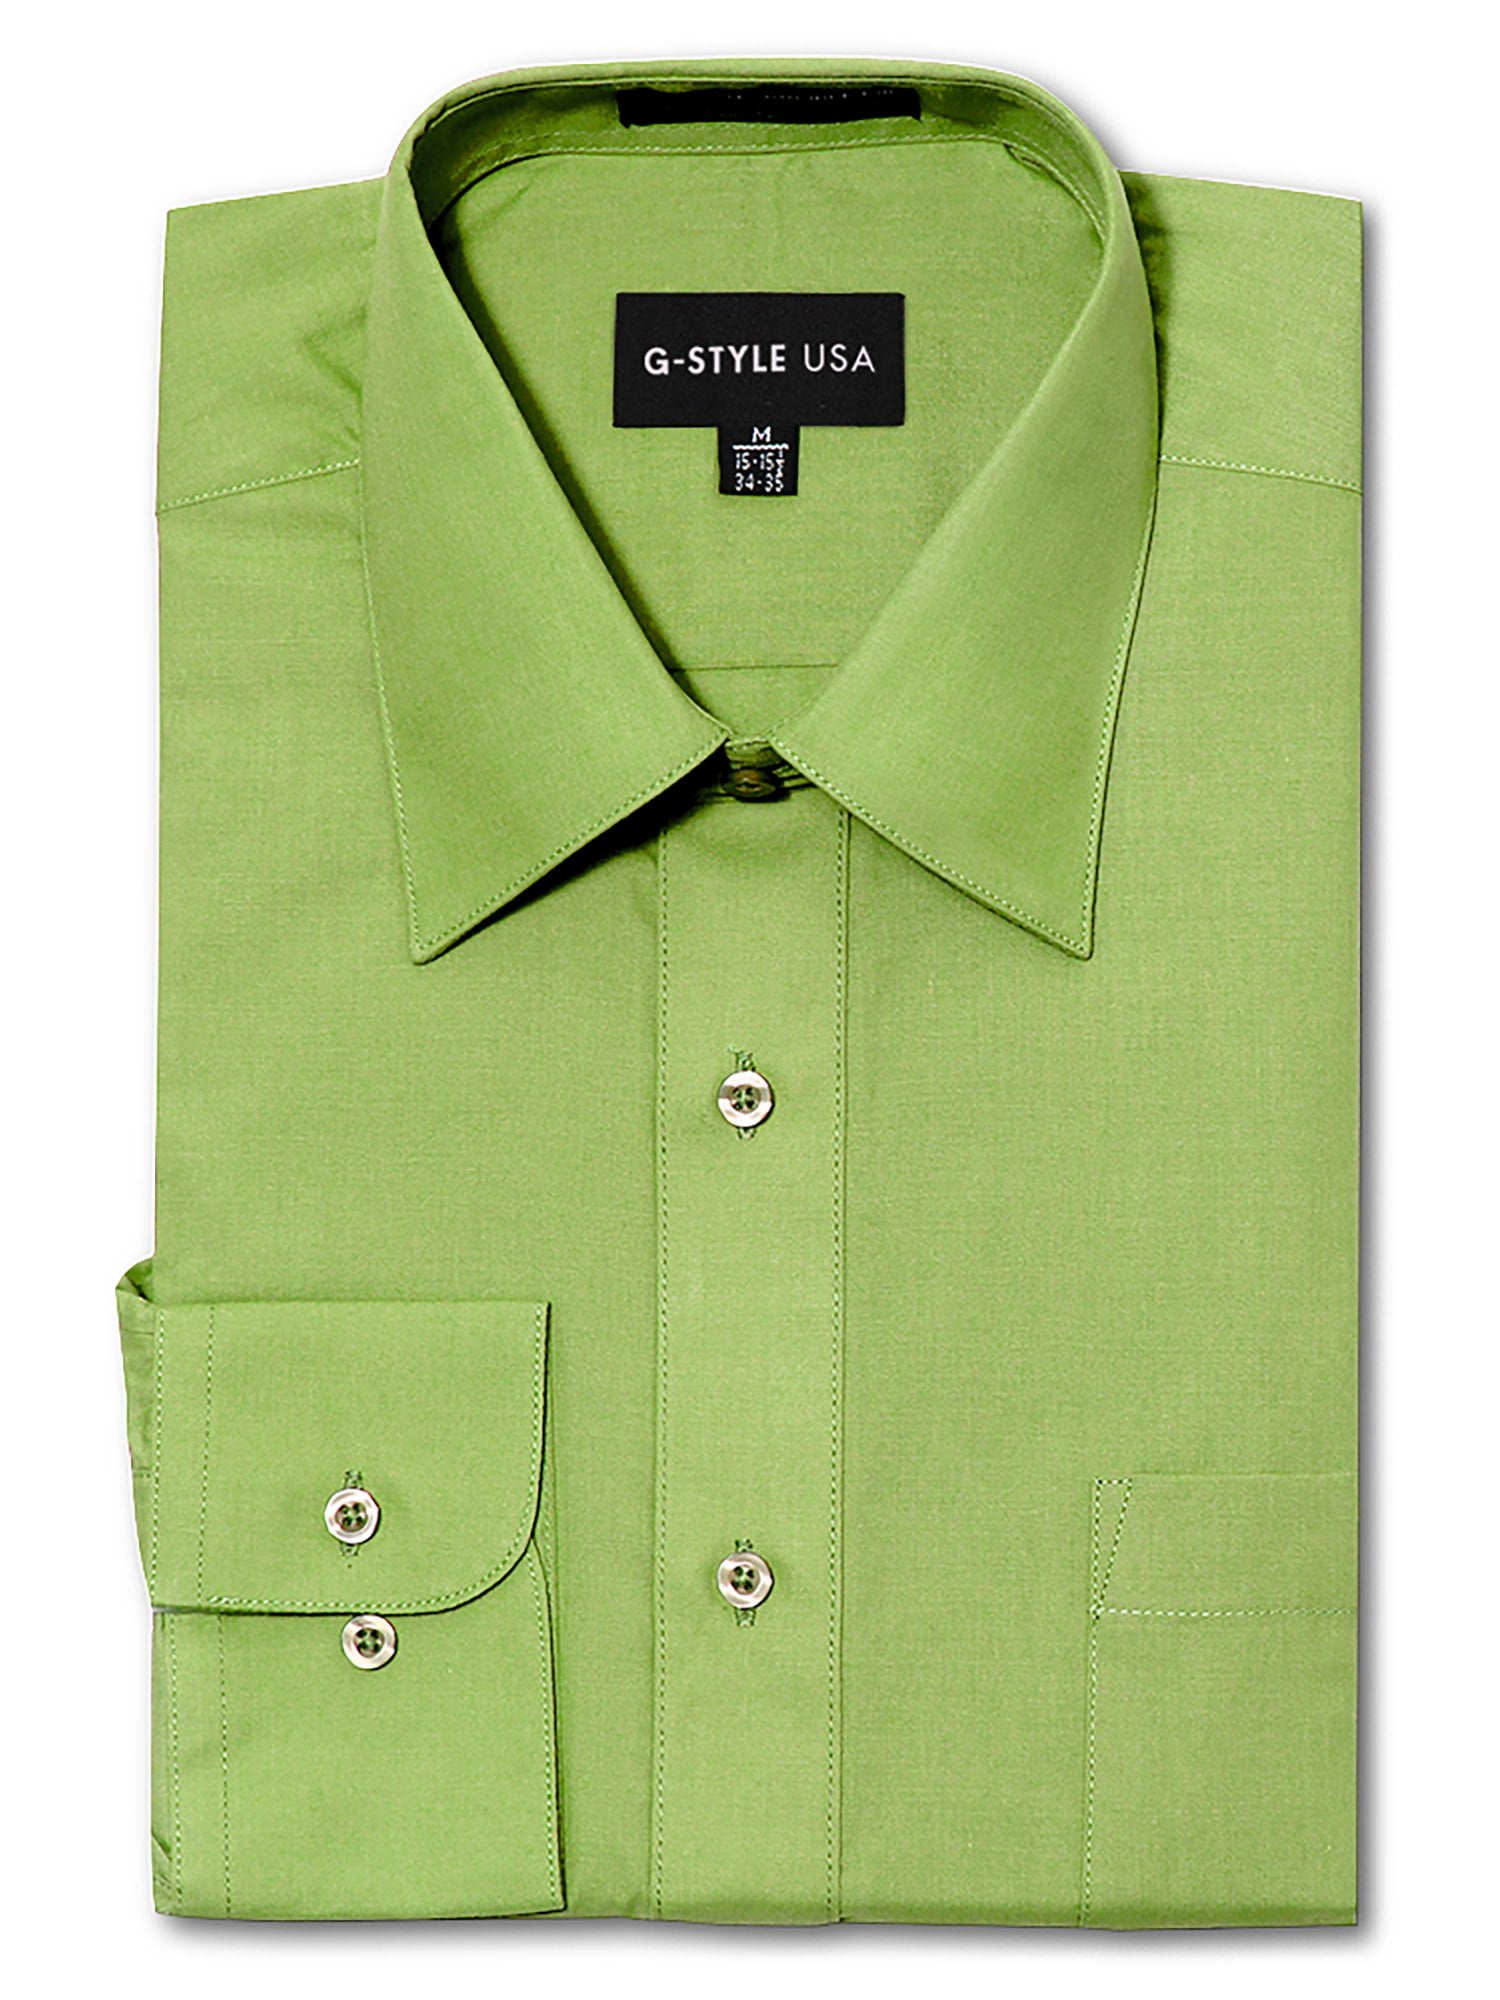 Mens green shirt tie set 21 collar new with tags rrp £32 